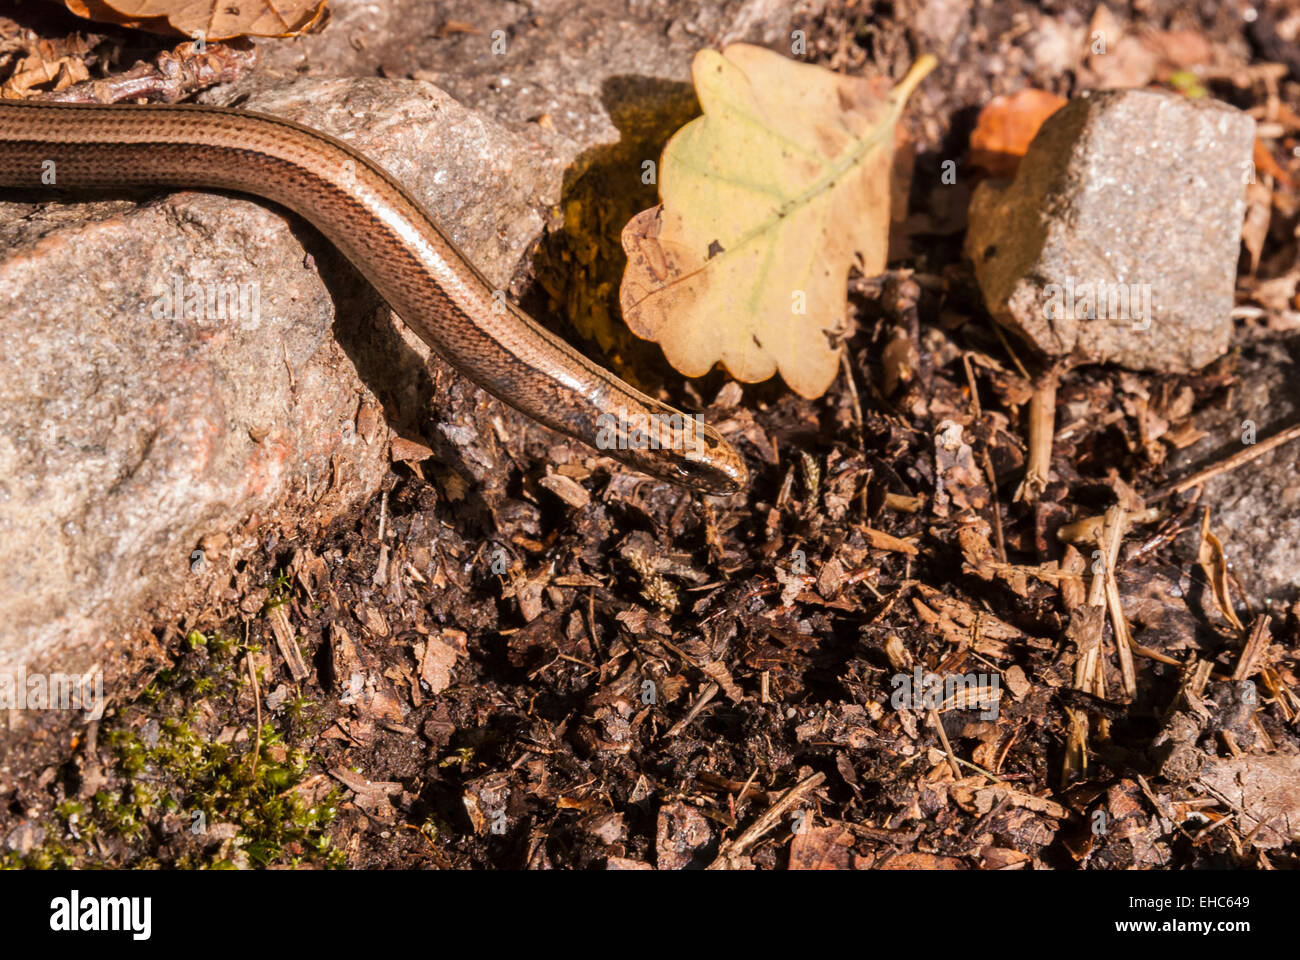 A Slow worm, Anguis fragilis, slithering over a rock and the soil Stock Photo